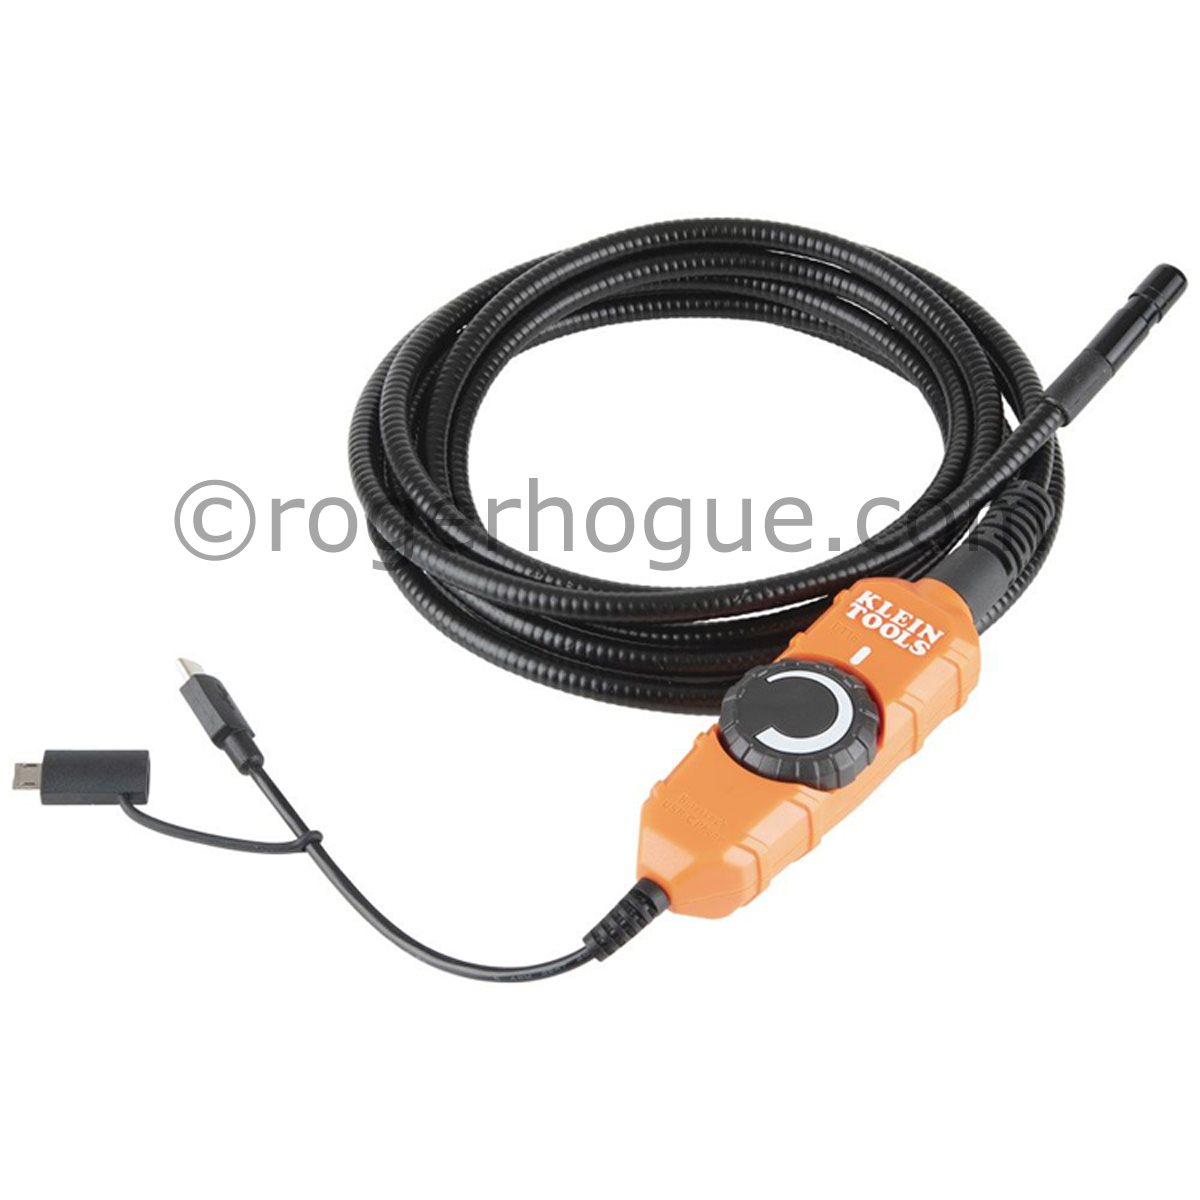 BORESCOPE FOR ANDROID® DEVICES 10 FOOT